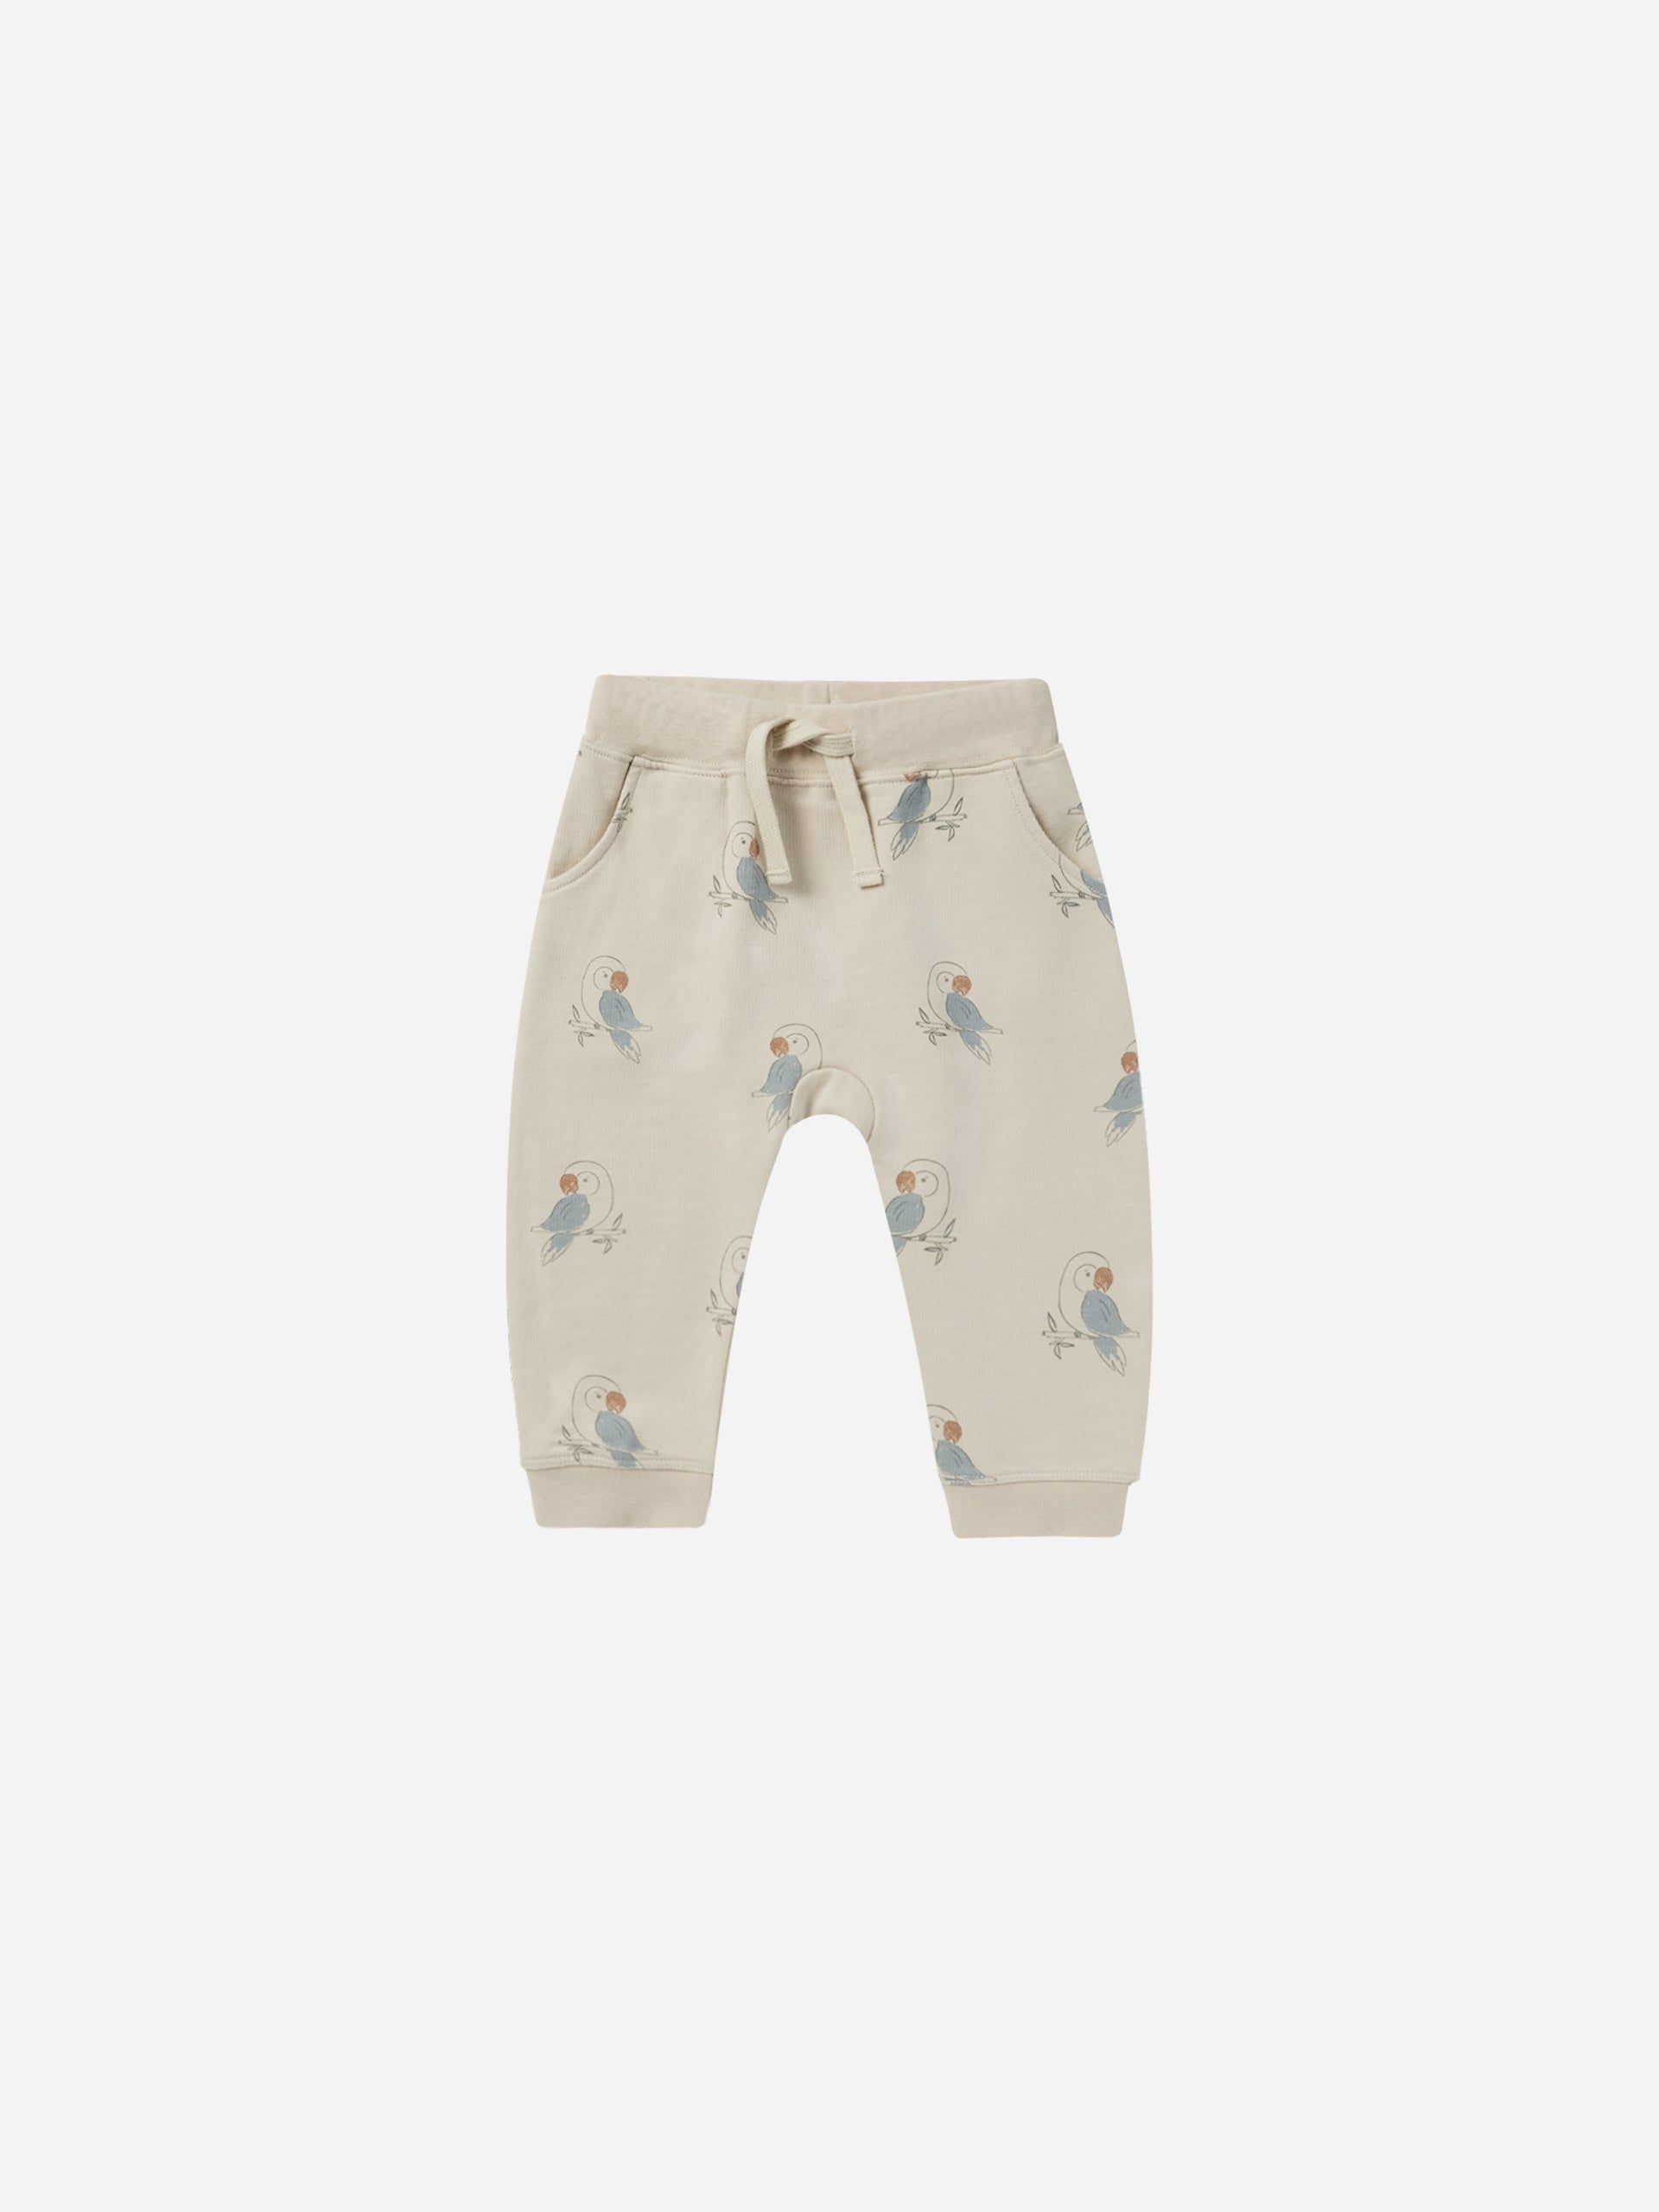 Sweatpant || Parrots - Rylee + Cru | Kids Clothes | Trendy Baby Clothes | Modern Infant Outfits |